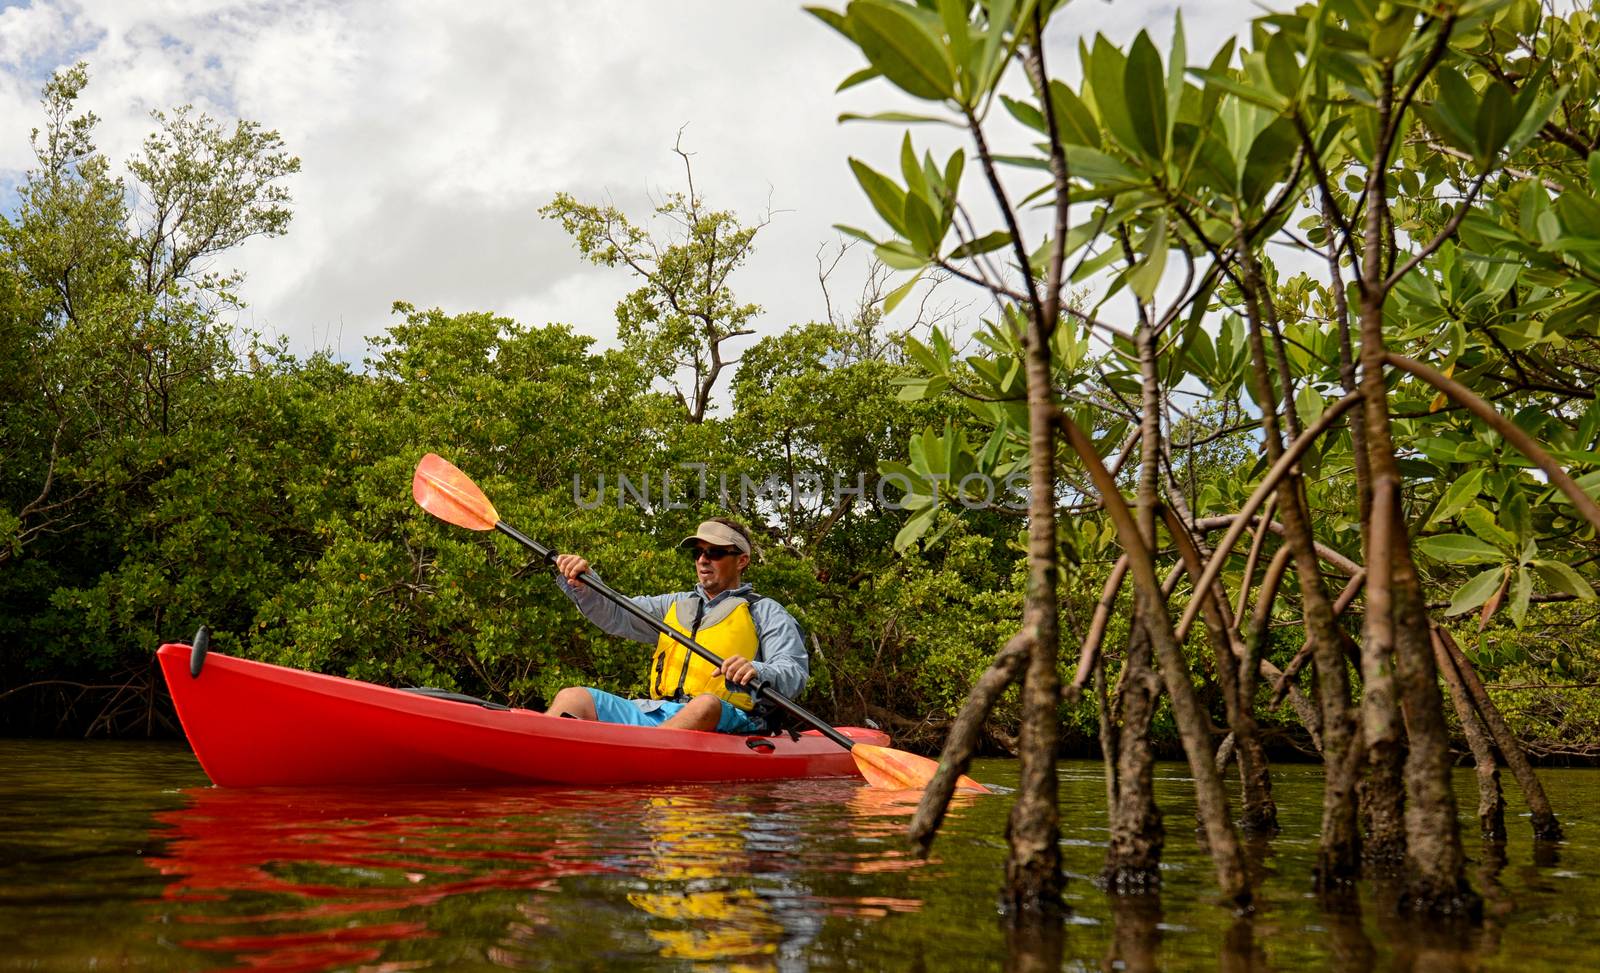 man in a red kayak through the mangroves in a tropical destination